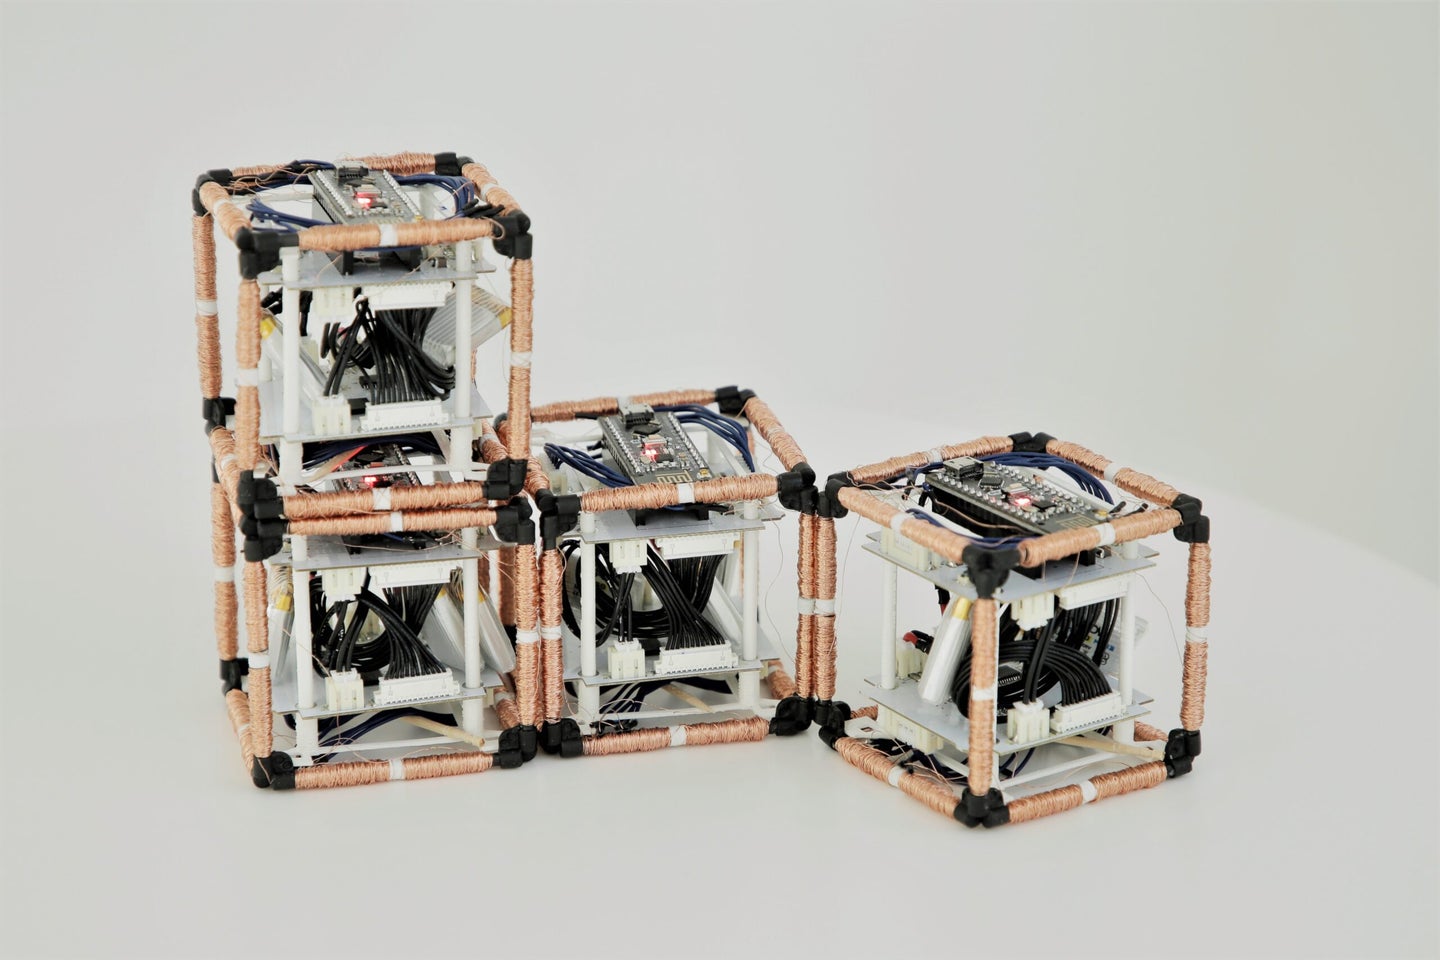 four cubes with copper wires wrapped around their edges that are connected electromagnetically